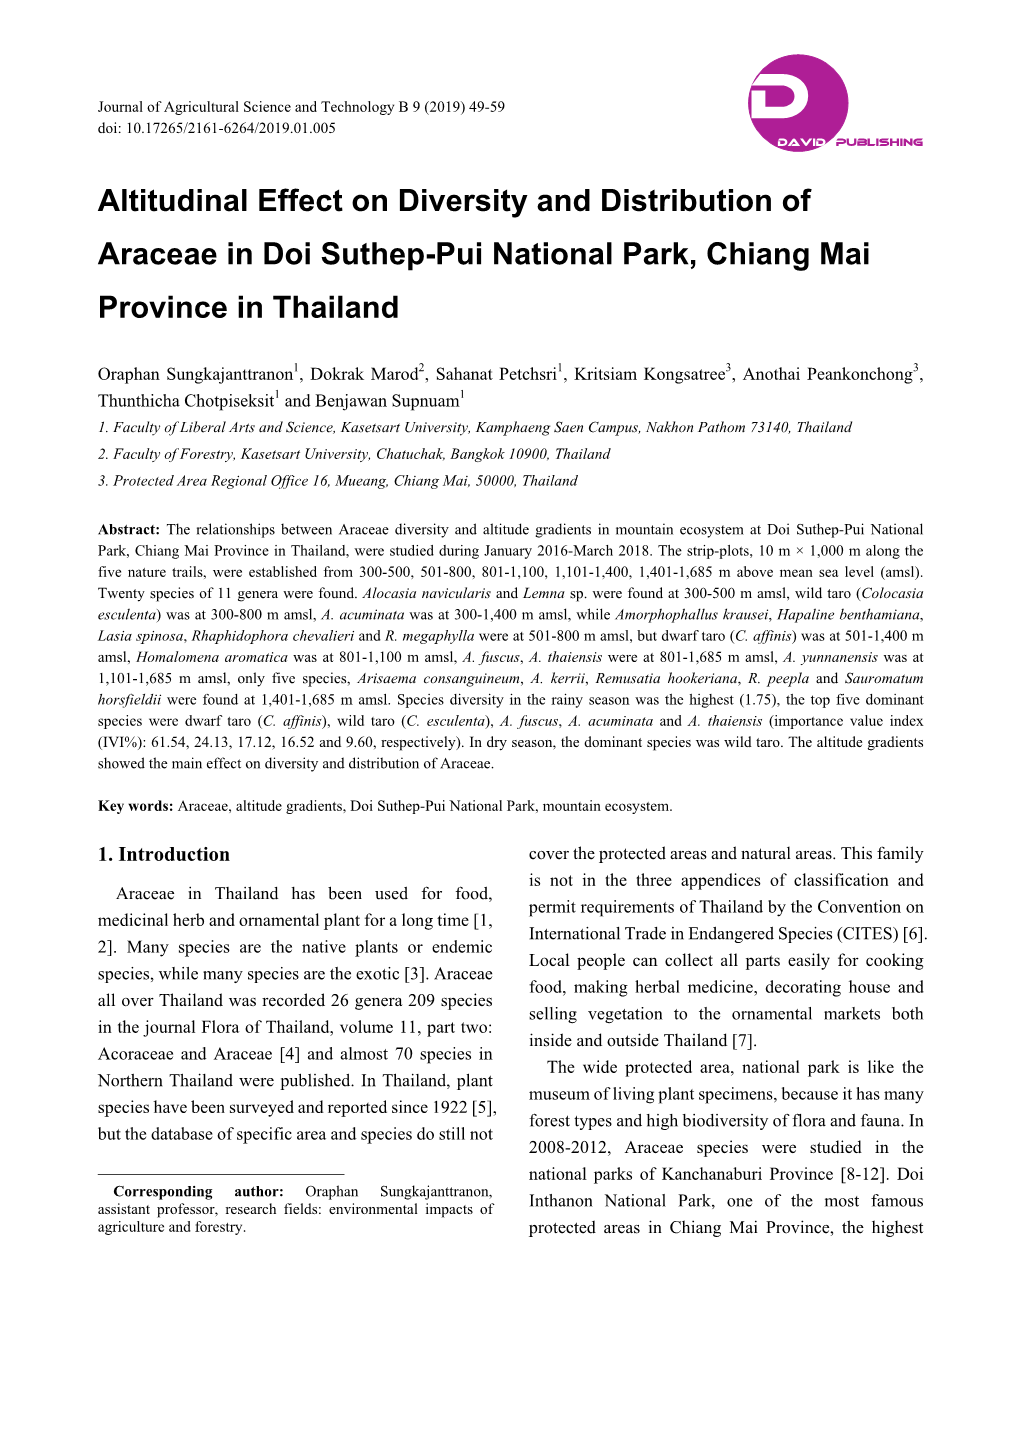 Altitudinal Effect on Diversity and Distribution of Araceae in Doi Suthep-Pui National Park, Chiang Mai Province in Thailand